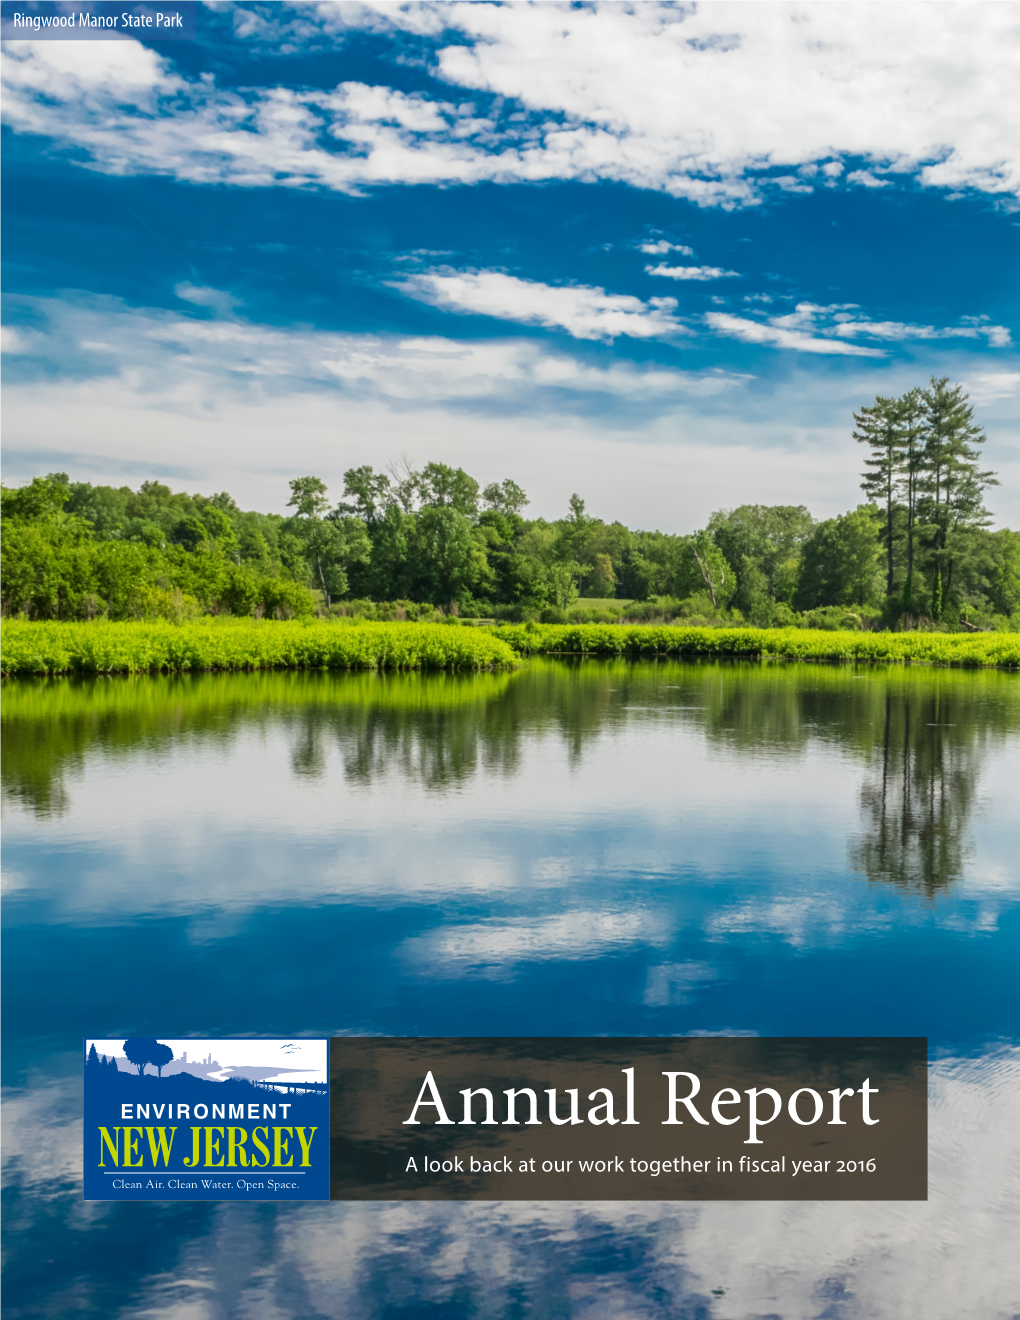 Annual Report a Look Back at Our Work Together in Fiscal Year 2016 Our Members Make the Difference